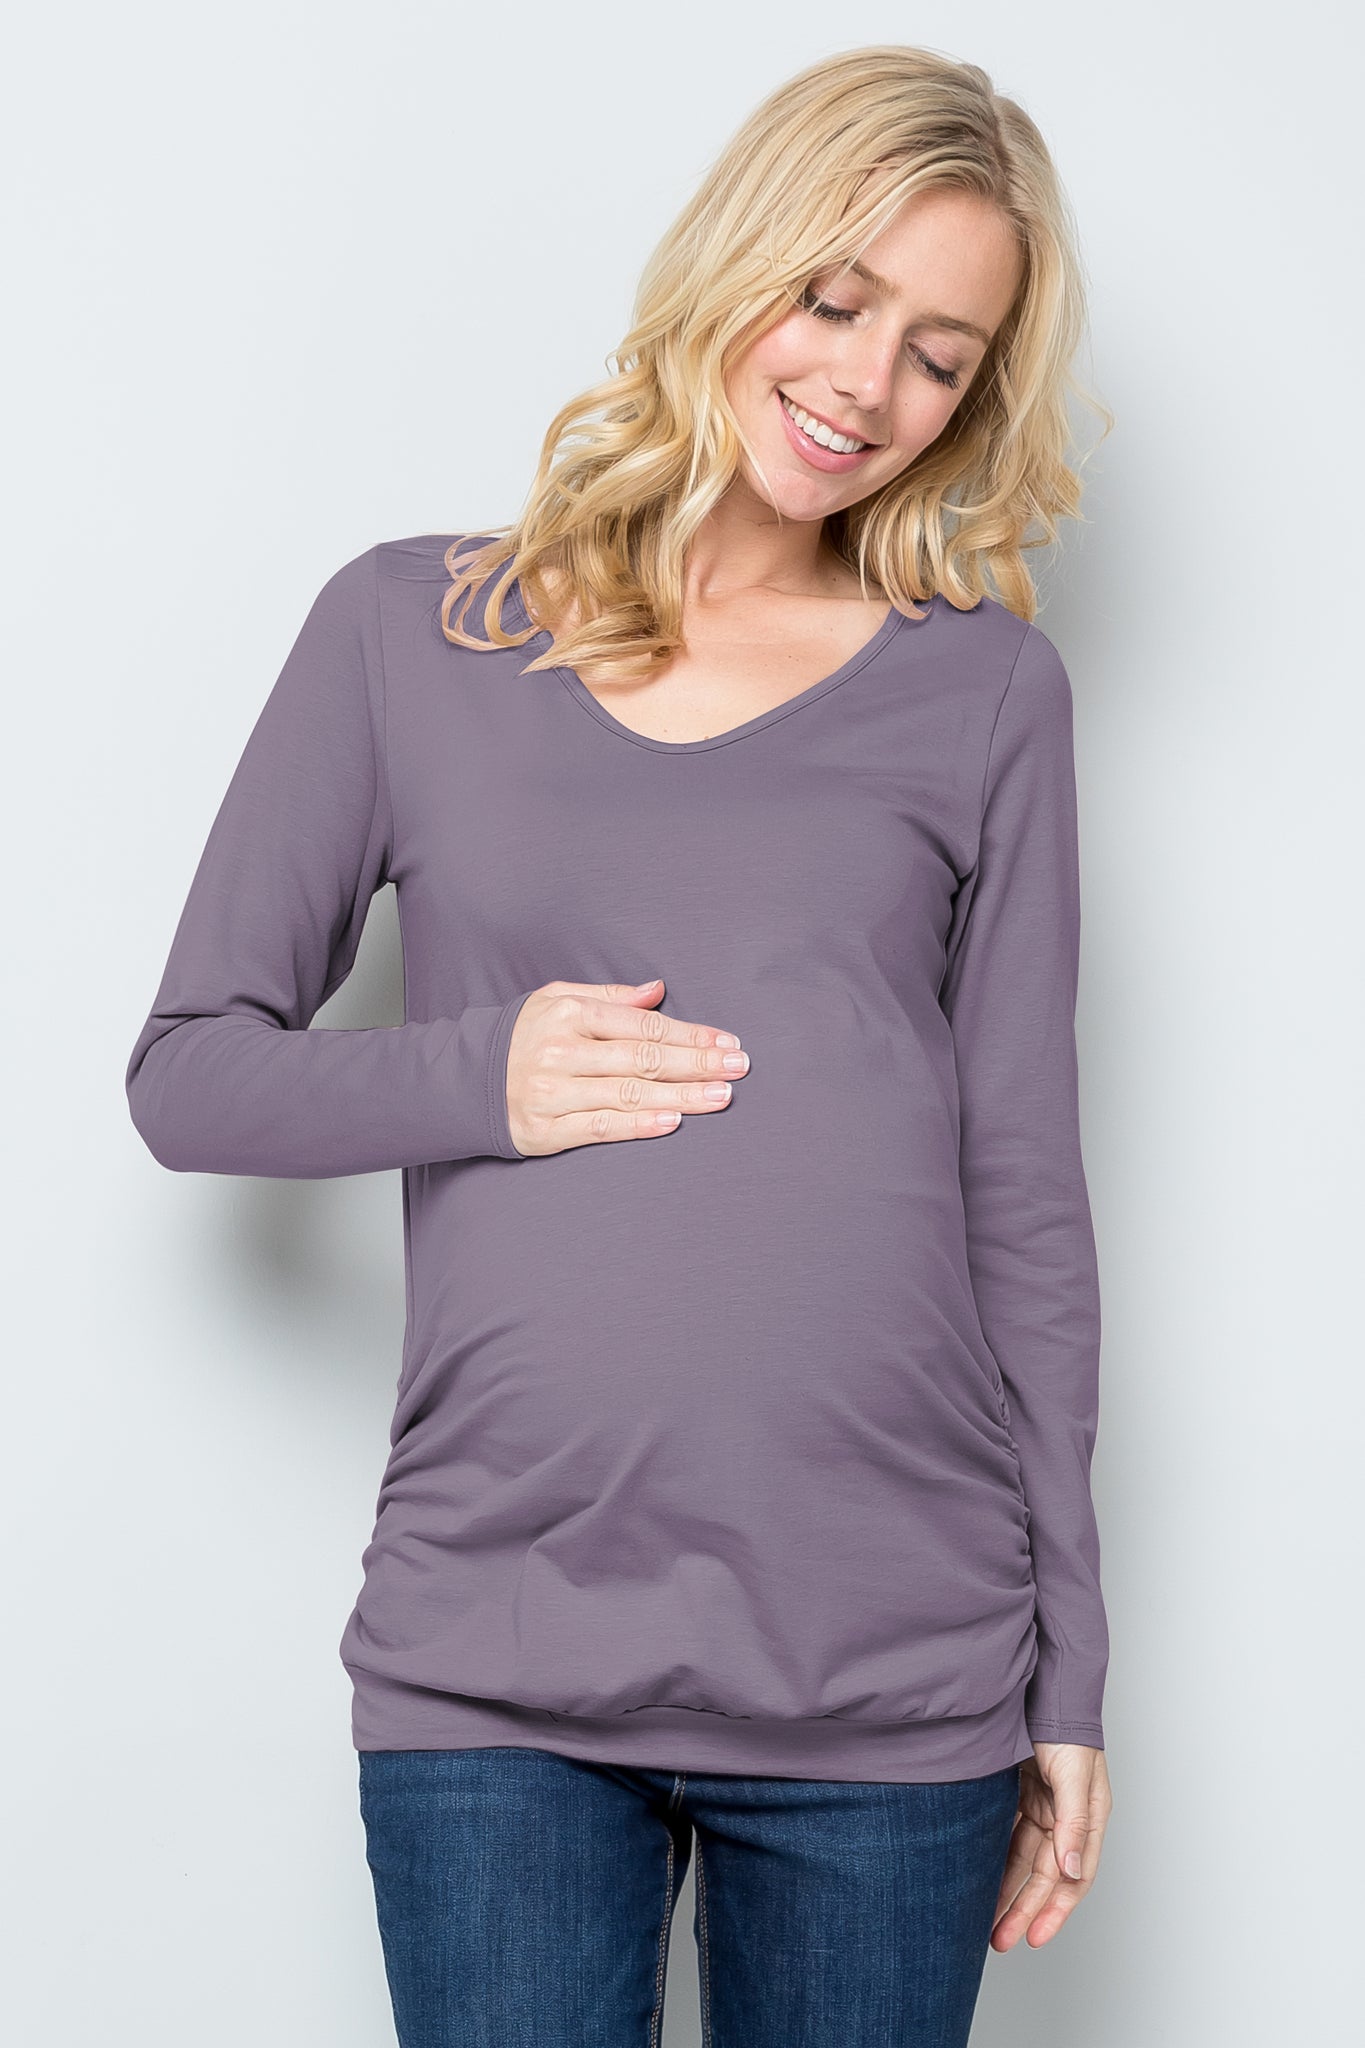 maternity pregnancy baby shower long sleeve v neck ruched top shirt blouse